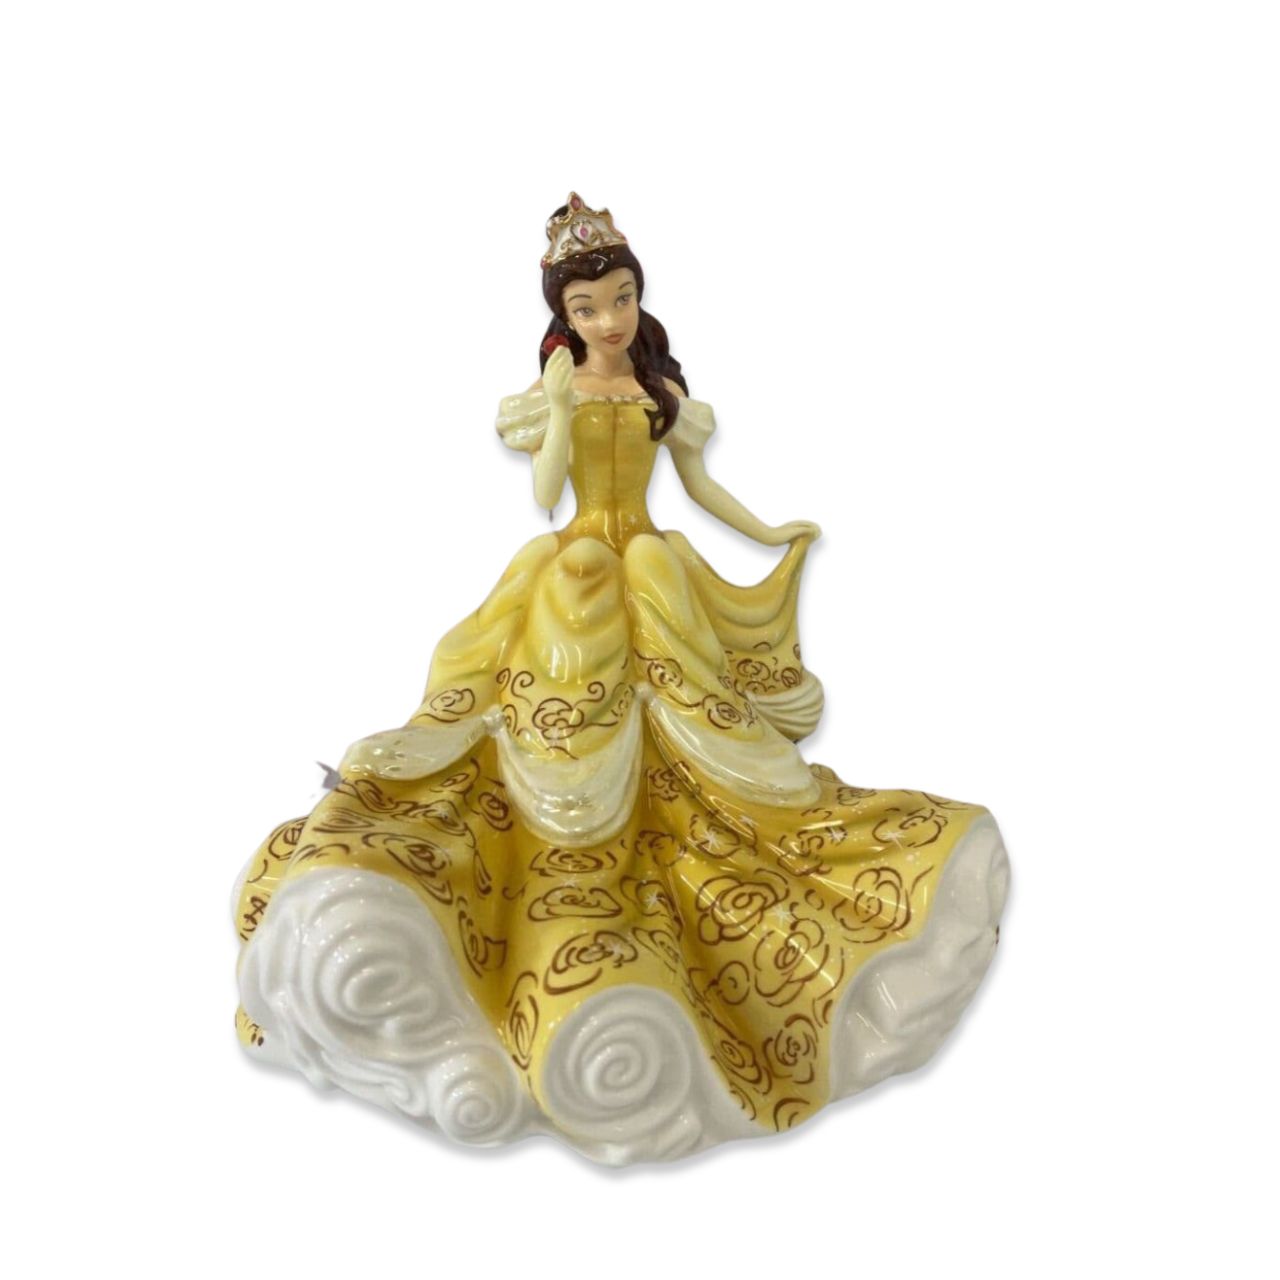 Disney Belle Princess figurine from Disney’s Beauty and the Beast  Full of movement in Valerie Annand’s model, and with delicate 22ct gold and Mother of Pearl lustre detail from Master Painter Dan Smith. Belle holds a handmade rose which is reflected in the decoration on her gown.